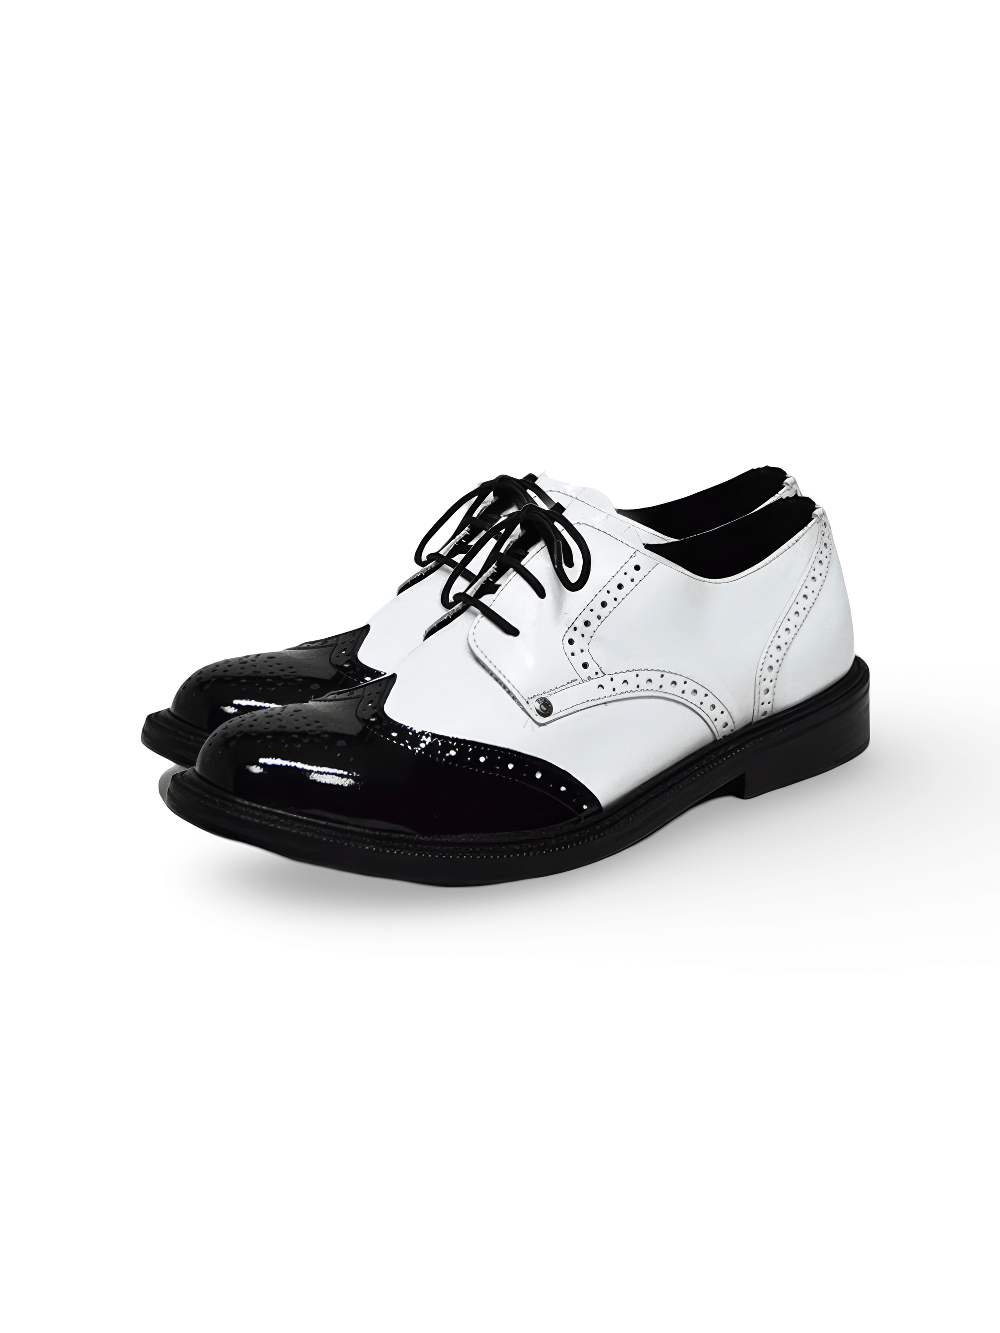 Men's Elegant White and Black Derby Shoes with Round Toe